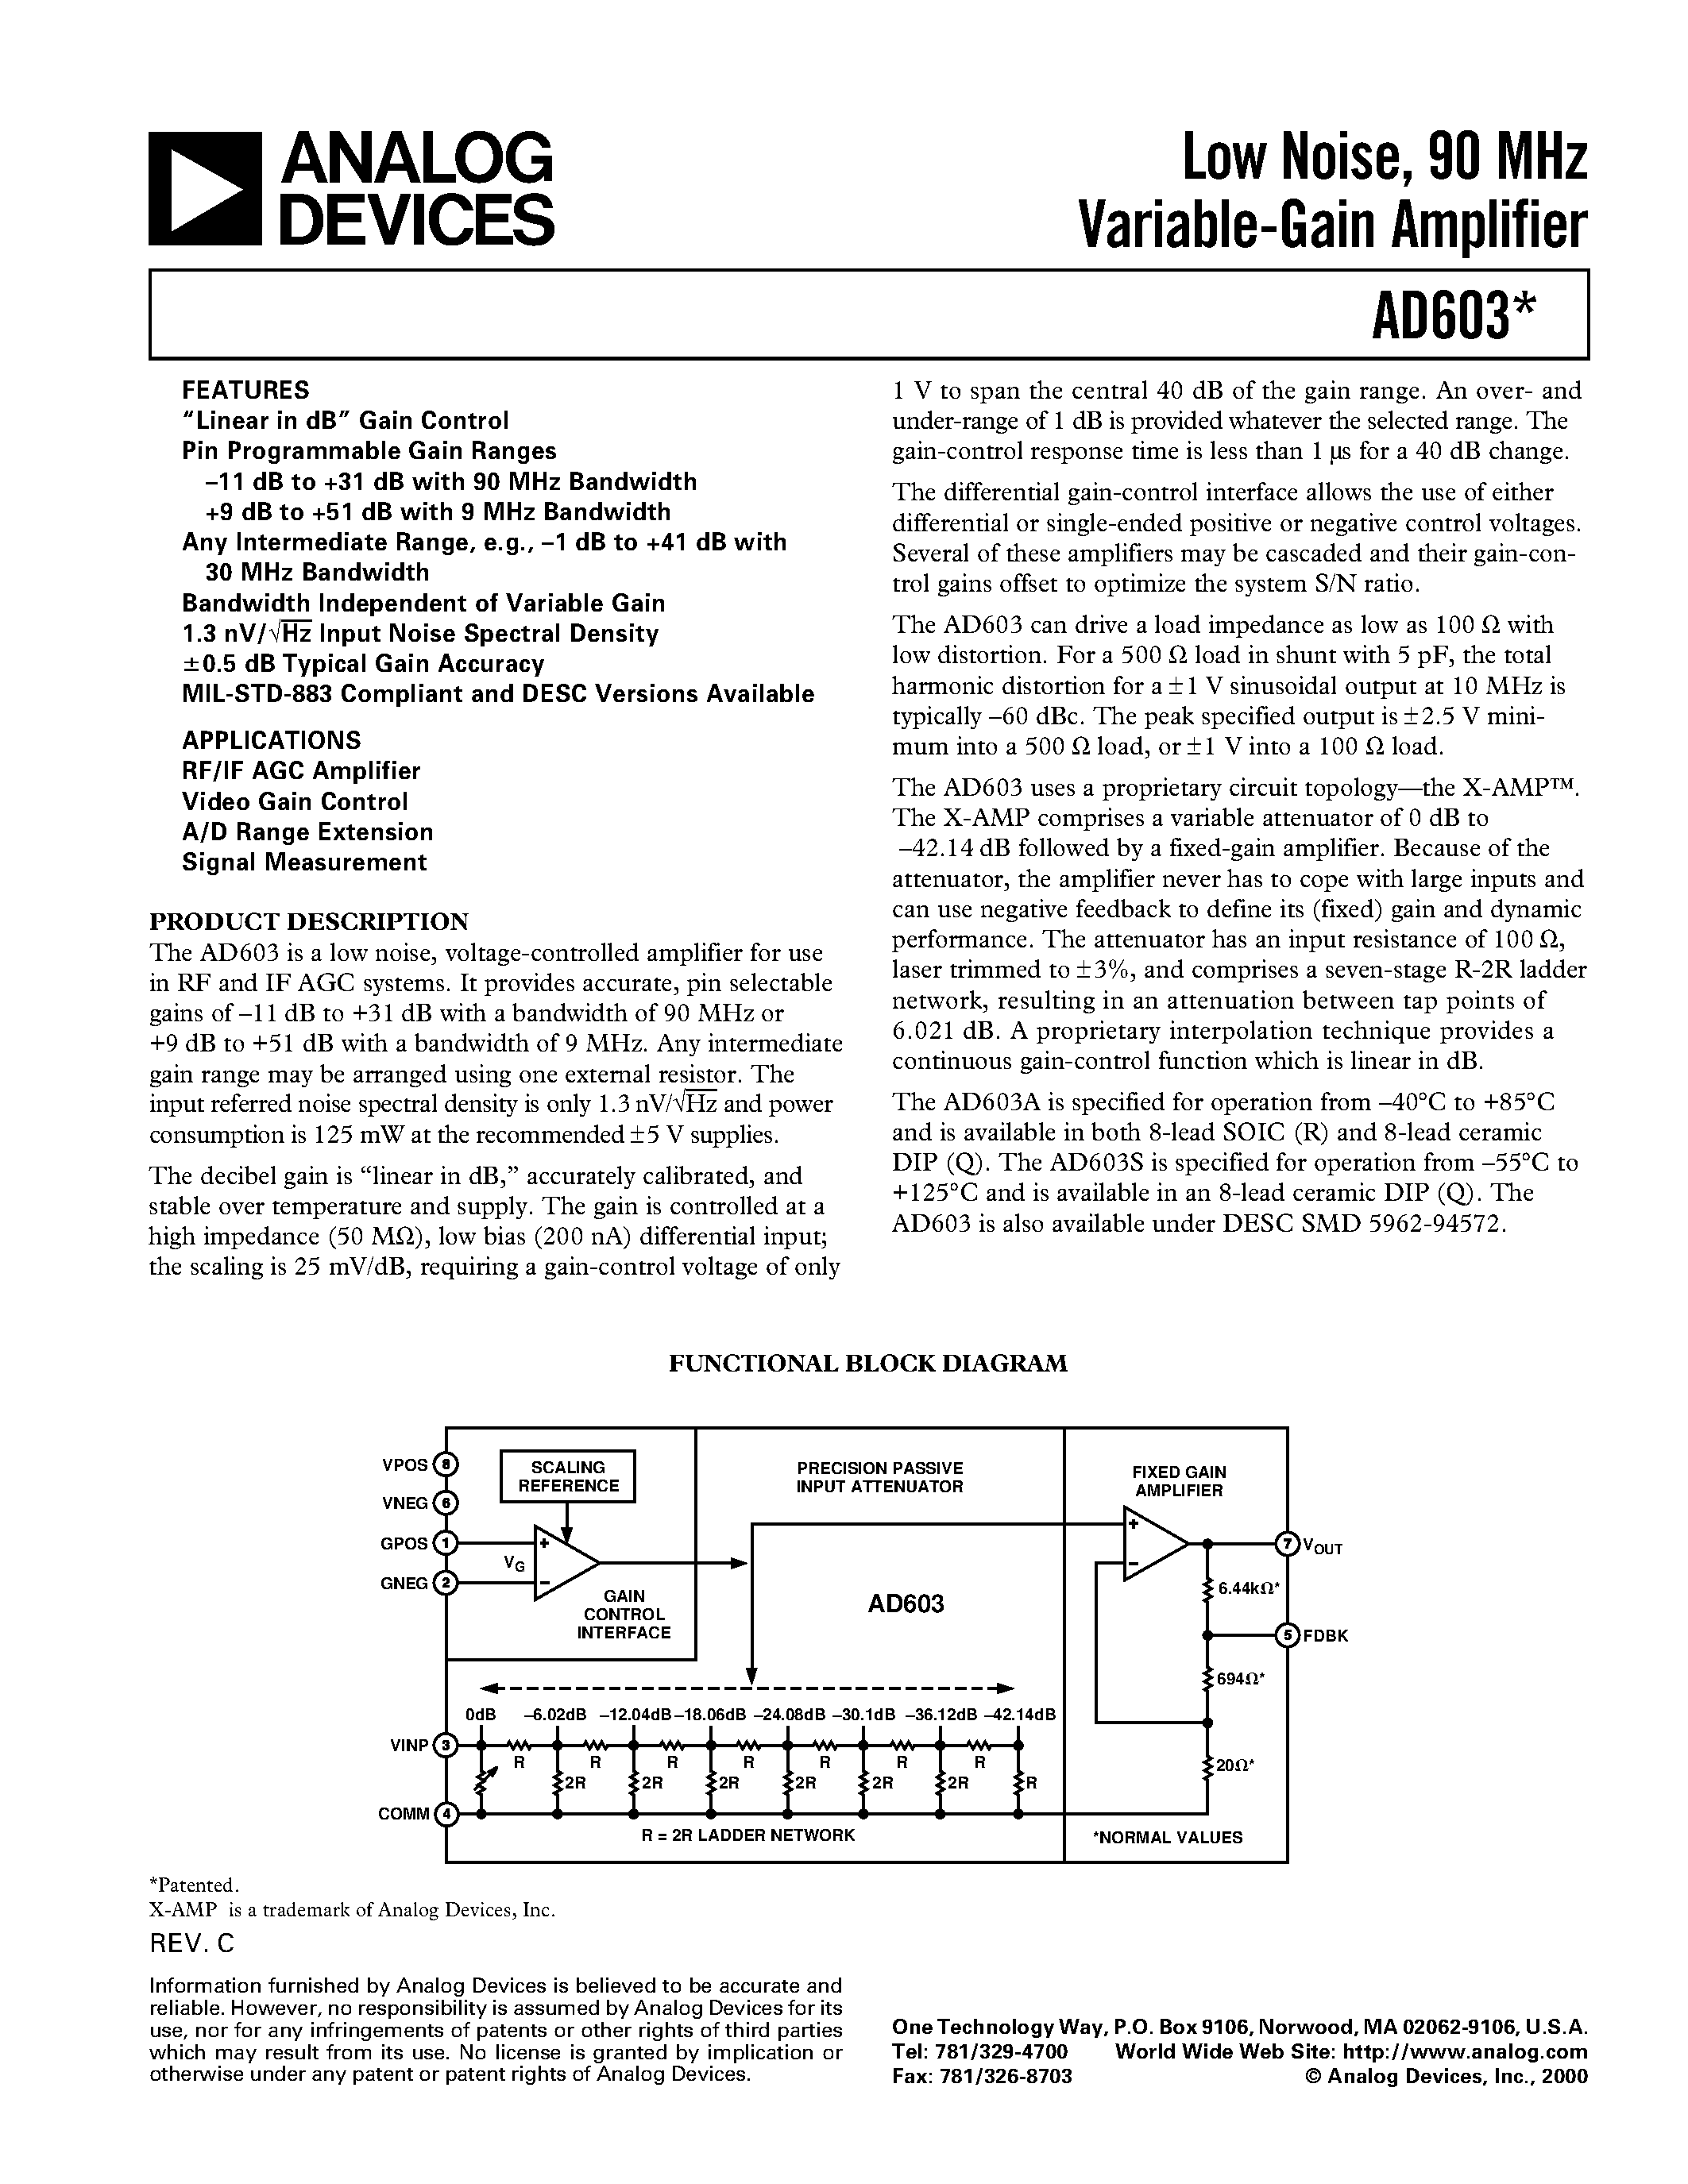 Datasheet AD603 - Low Noise/ 90 MHz Variable-Gain Amplifier page 1